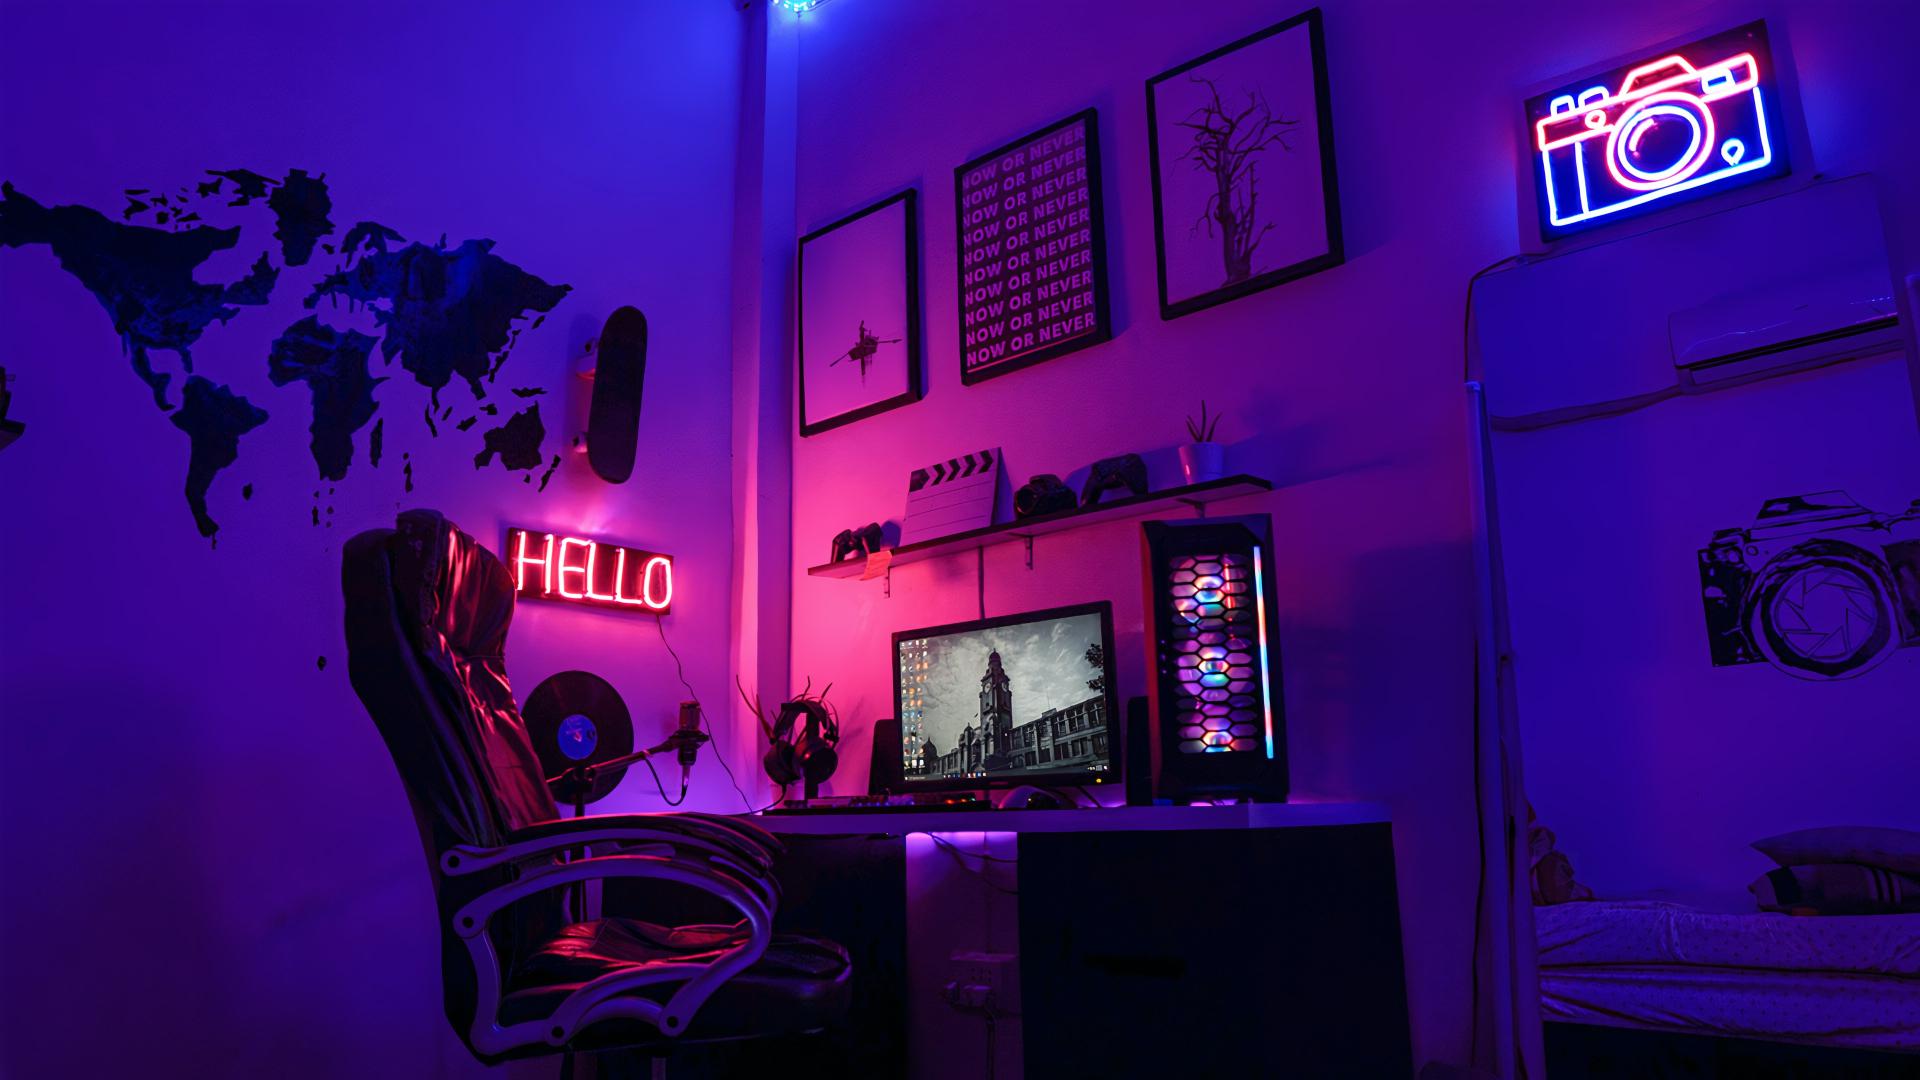 Brighten Up Your Gaming Room With LED Lights - Marcled Blog